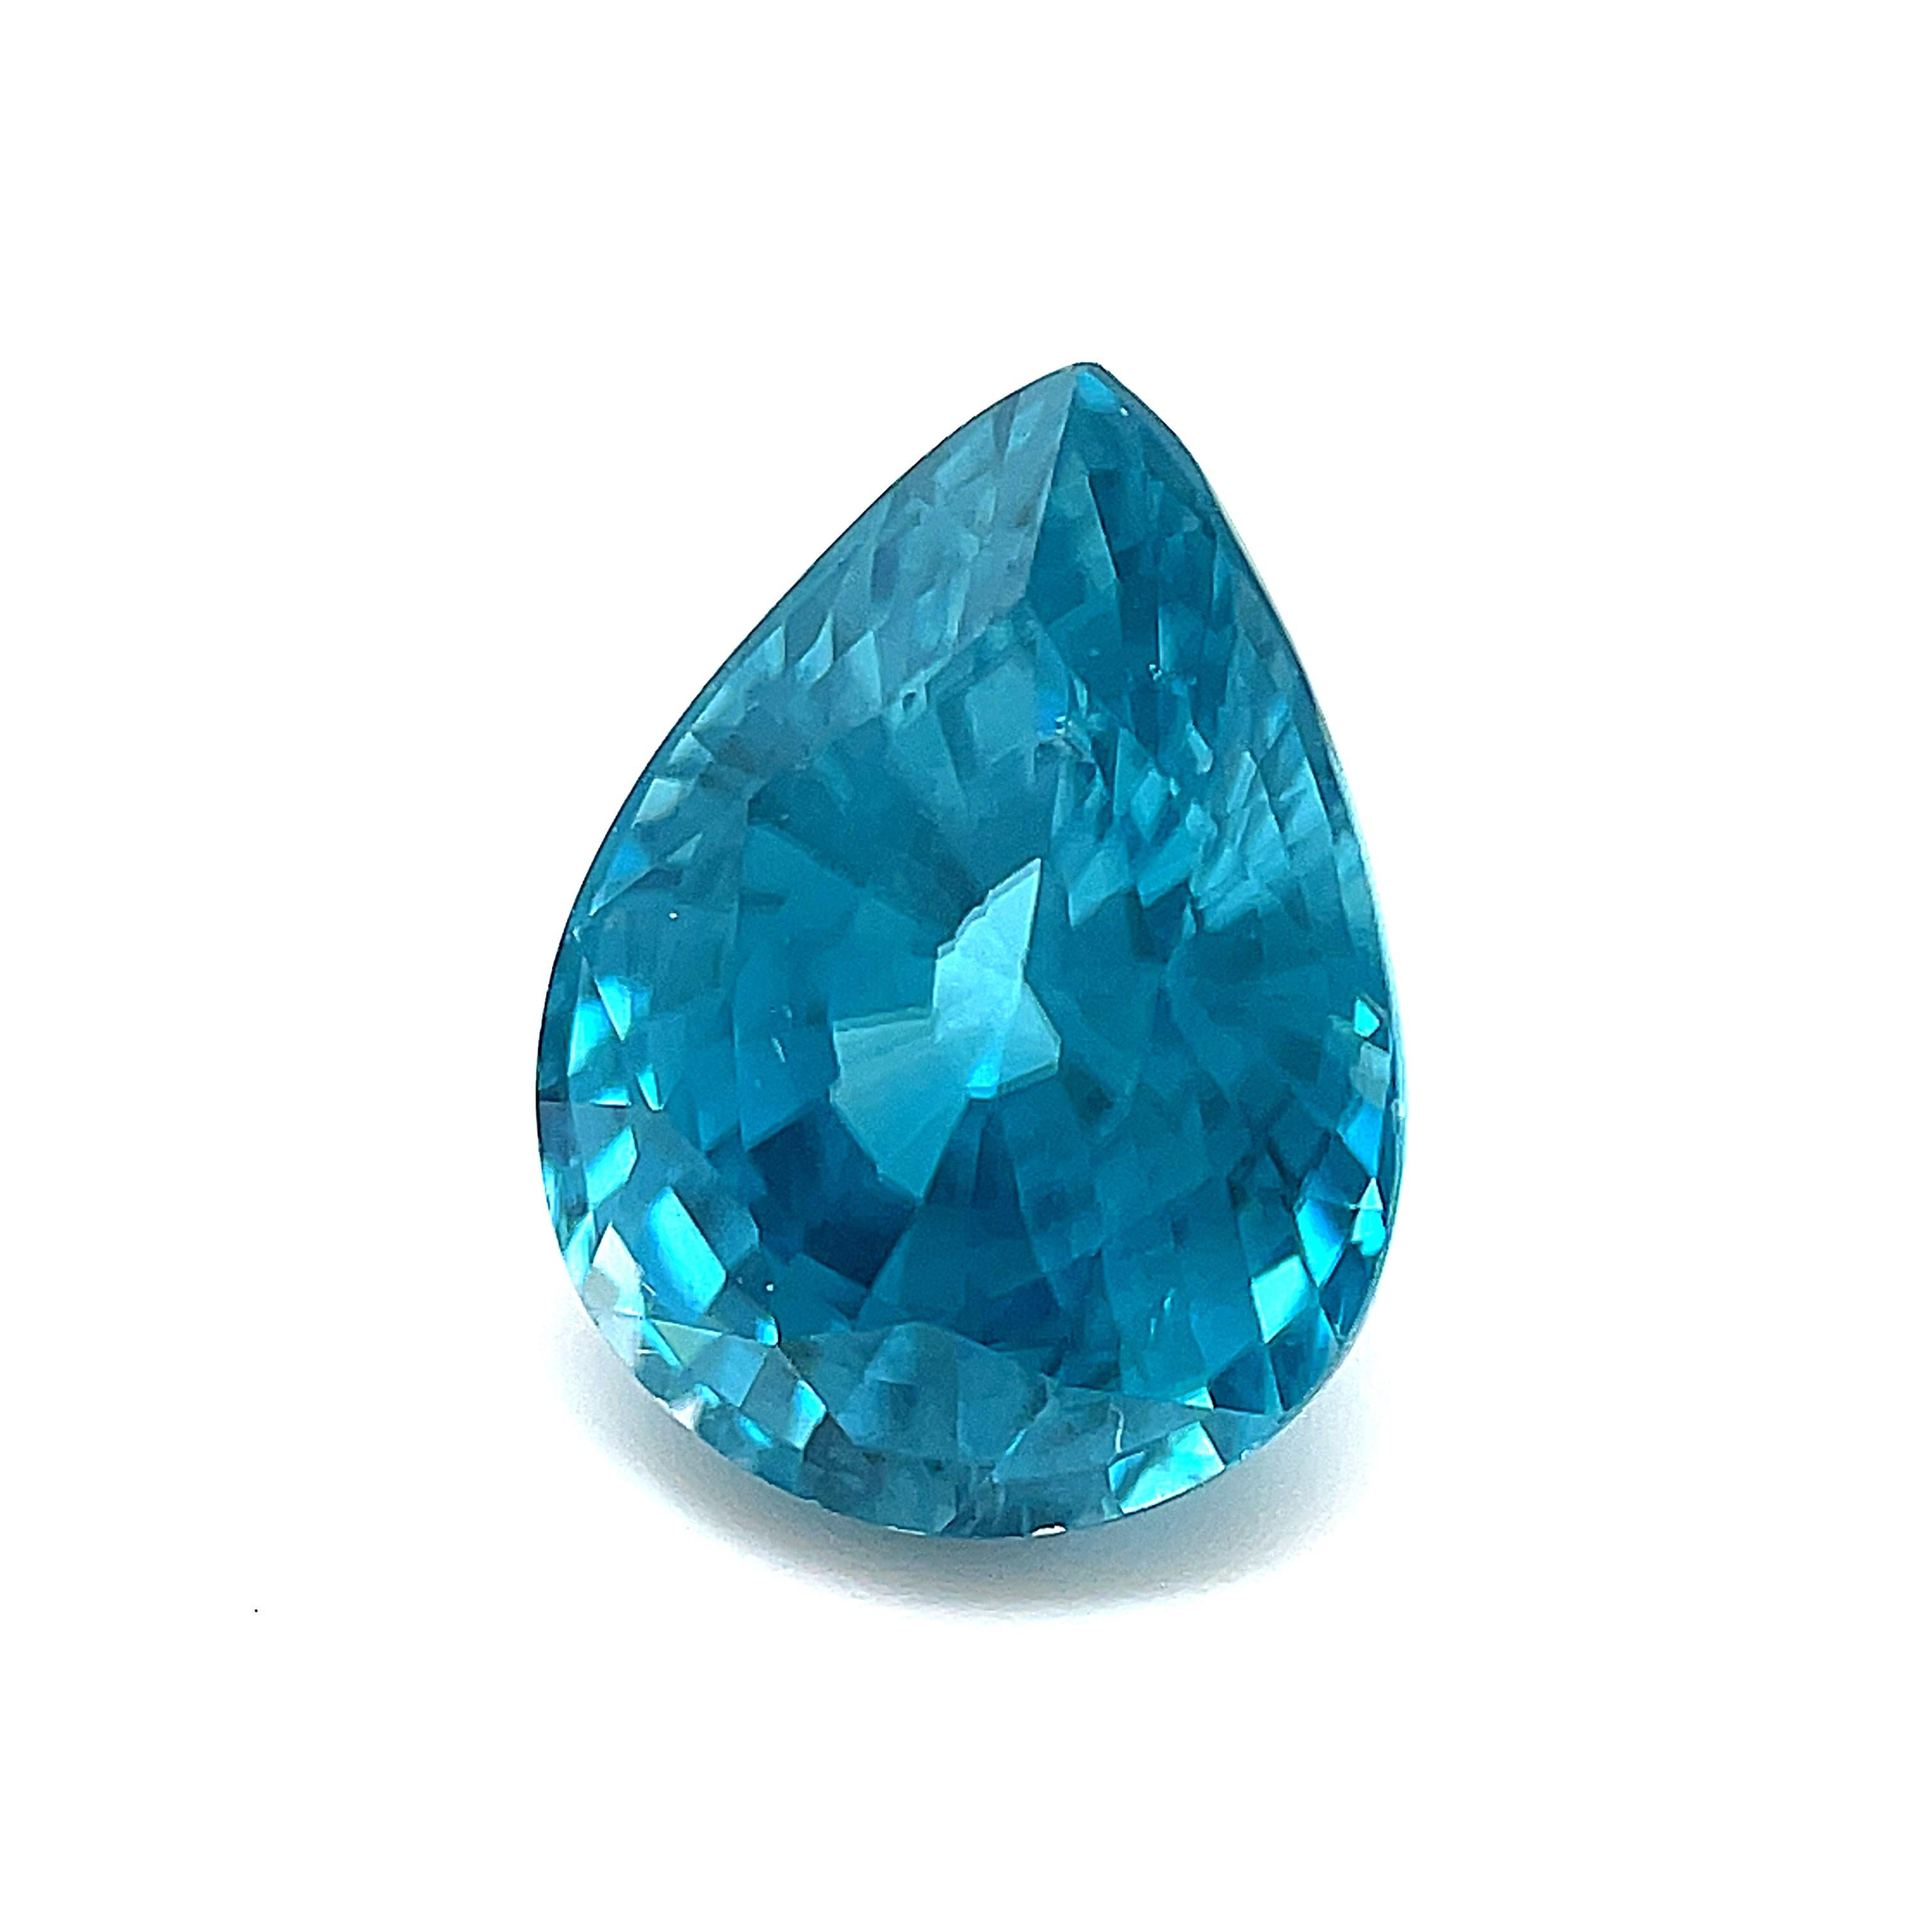 4.72 Carat Pear Shaped Blue Zircon, Unset Loose Gemstone  In New Condition For Sale In Los Angeles, CA